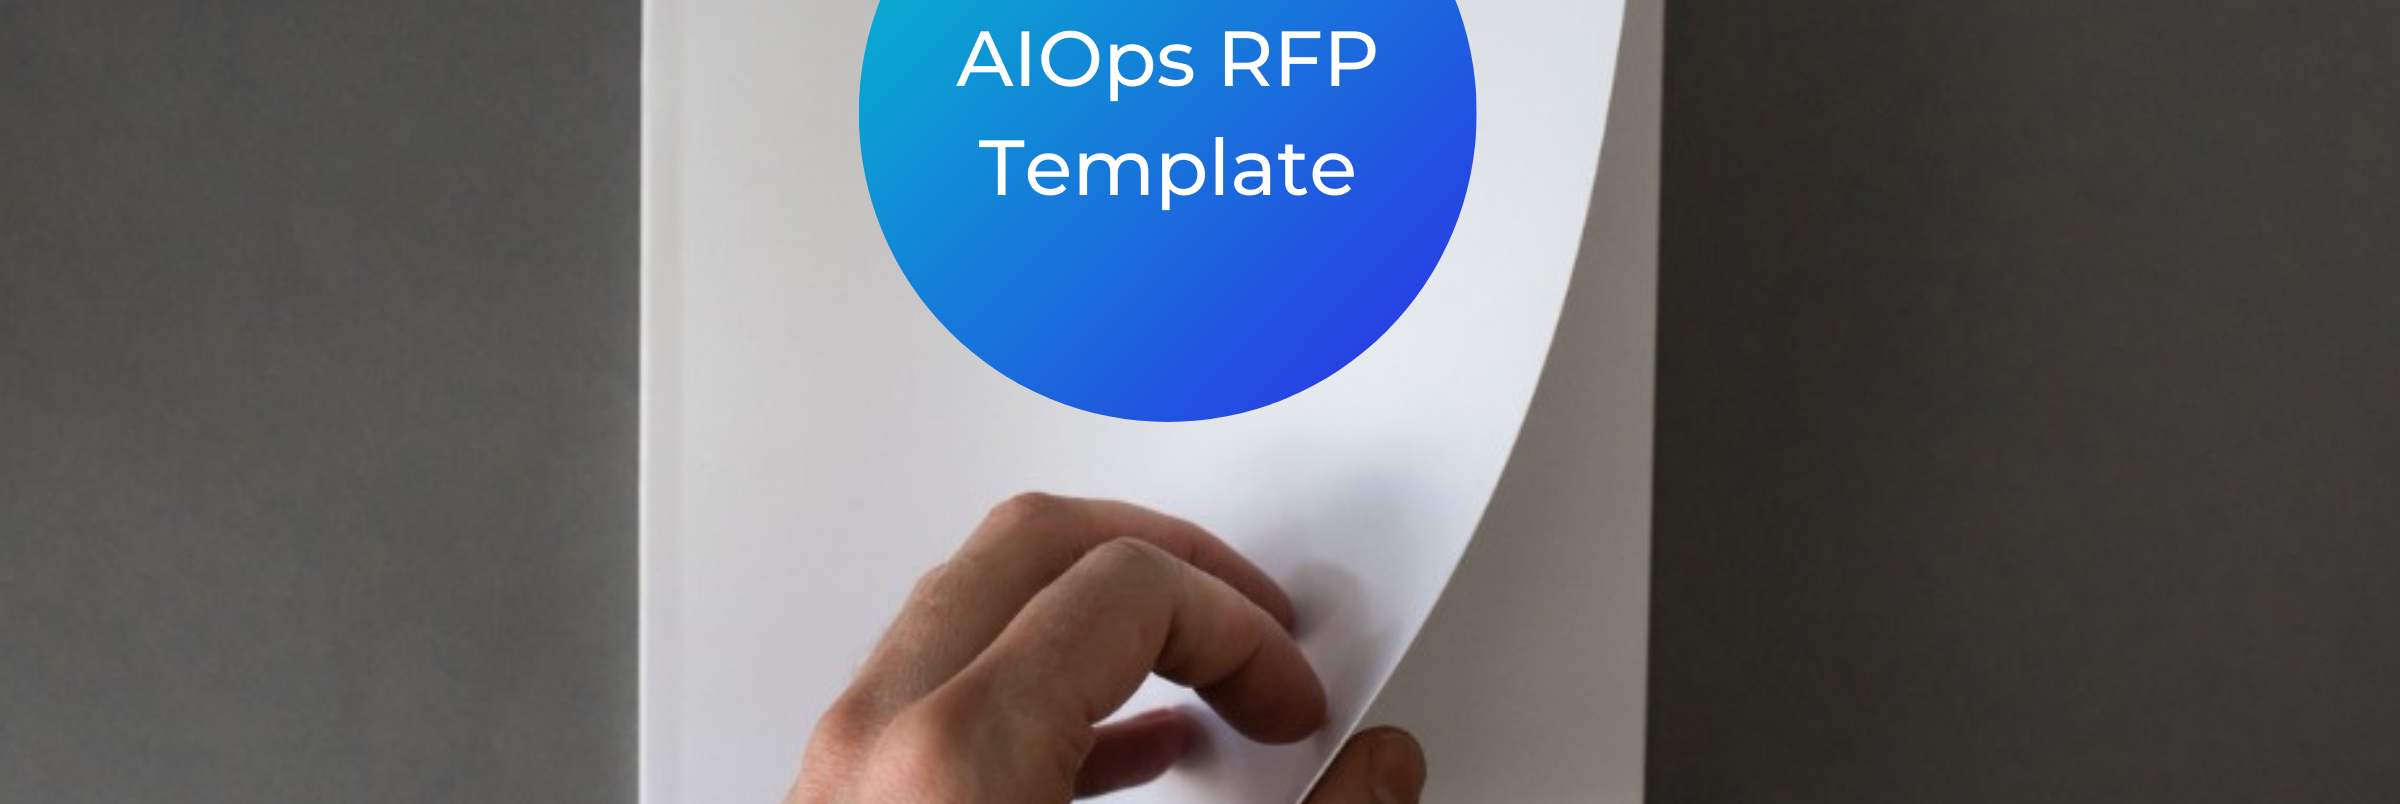 AIOps RFP Template